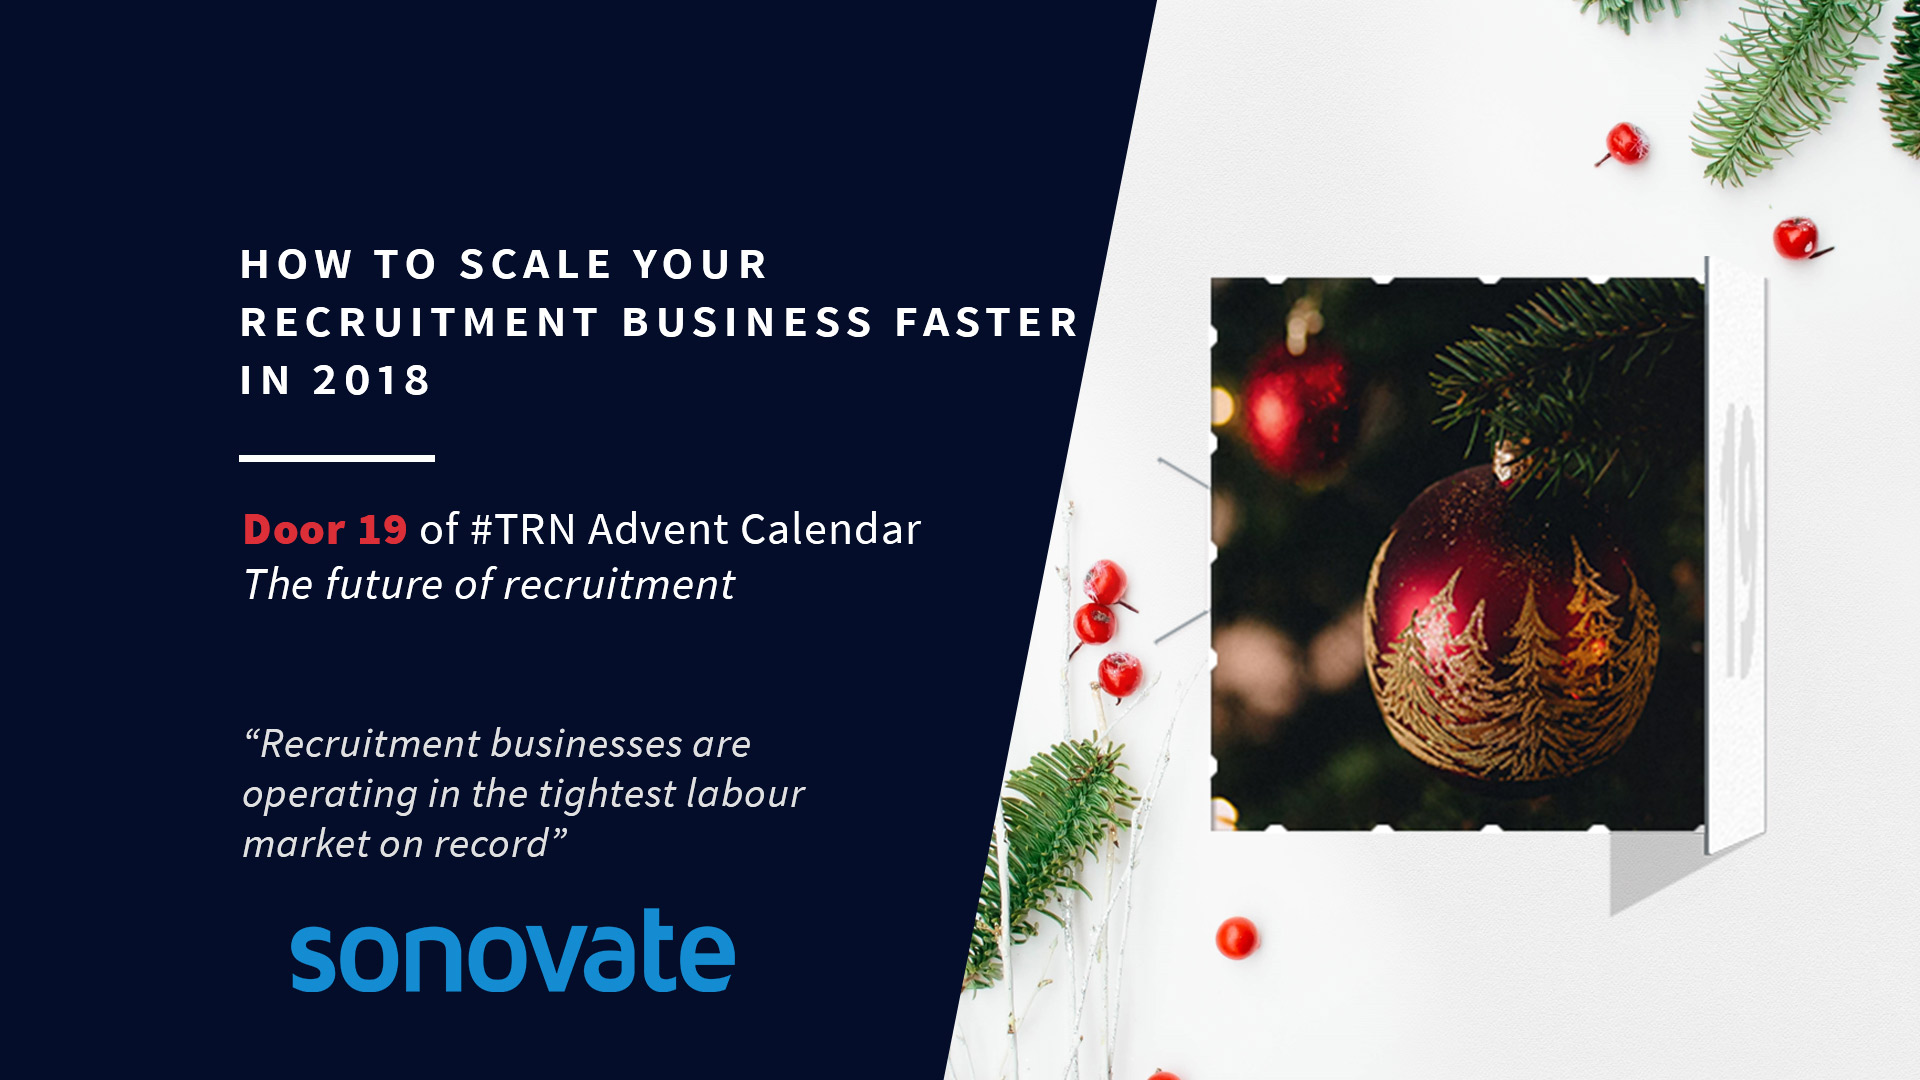 How to Scale your Recruitment Business Faster in 2018 with Sonovate